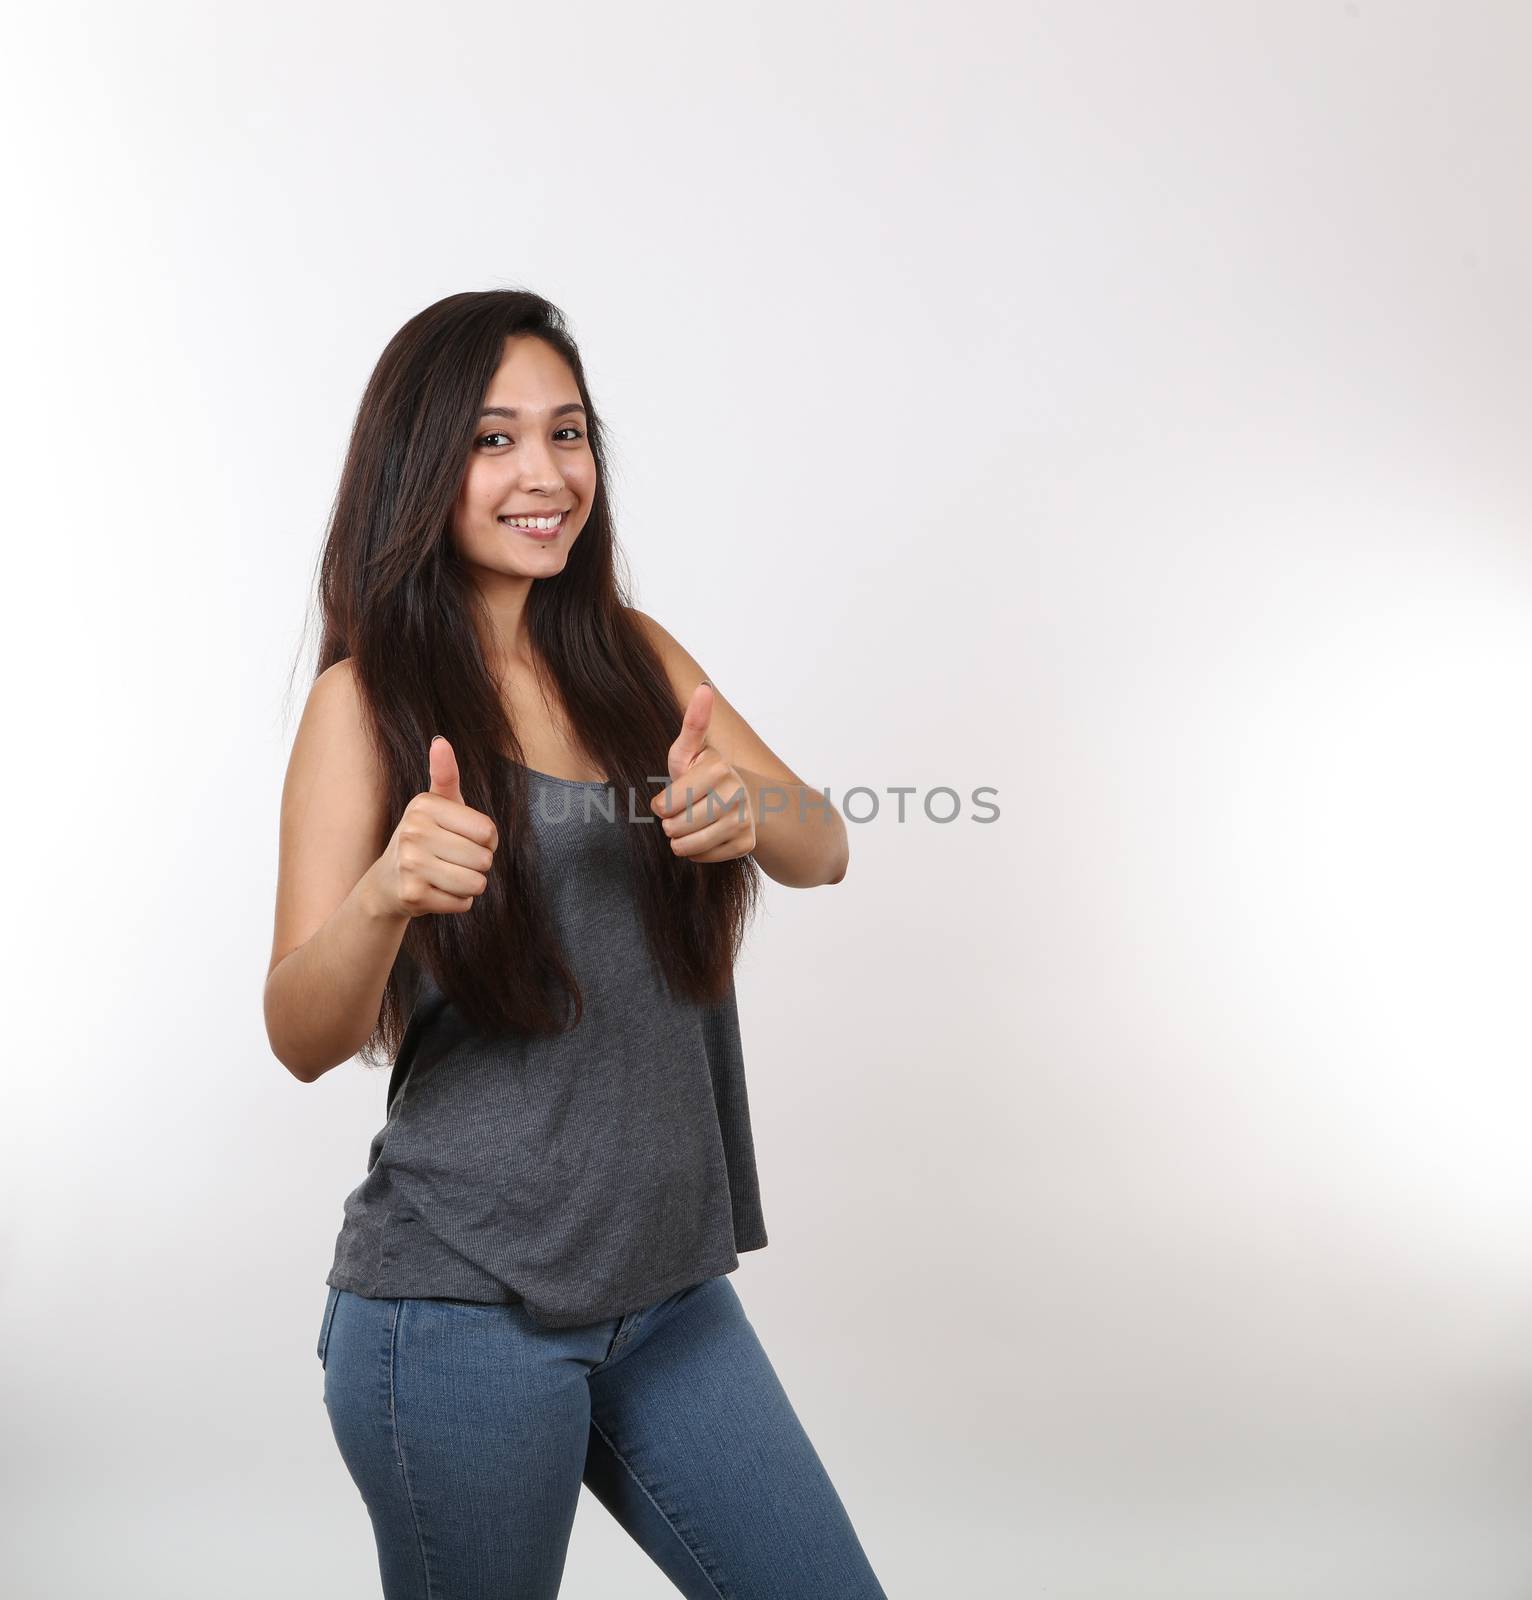 A young attractive girl wearing jeans gives two thumbs up.